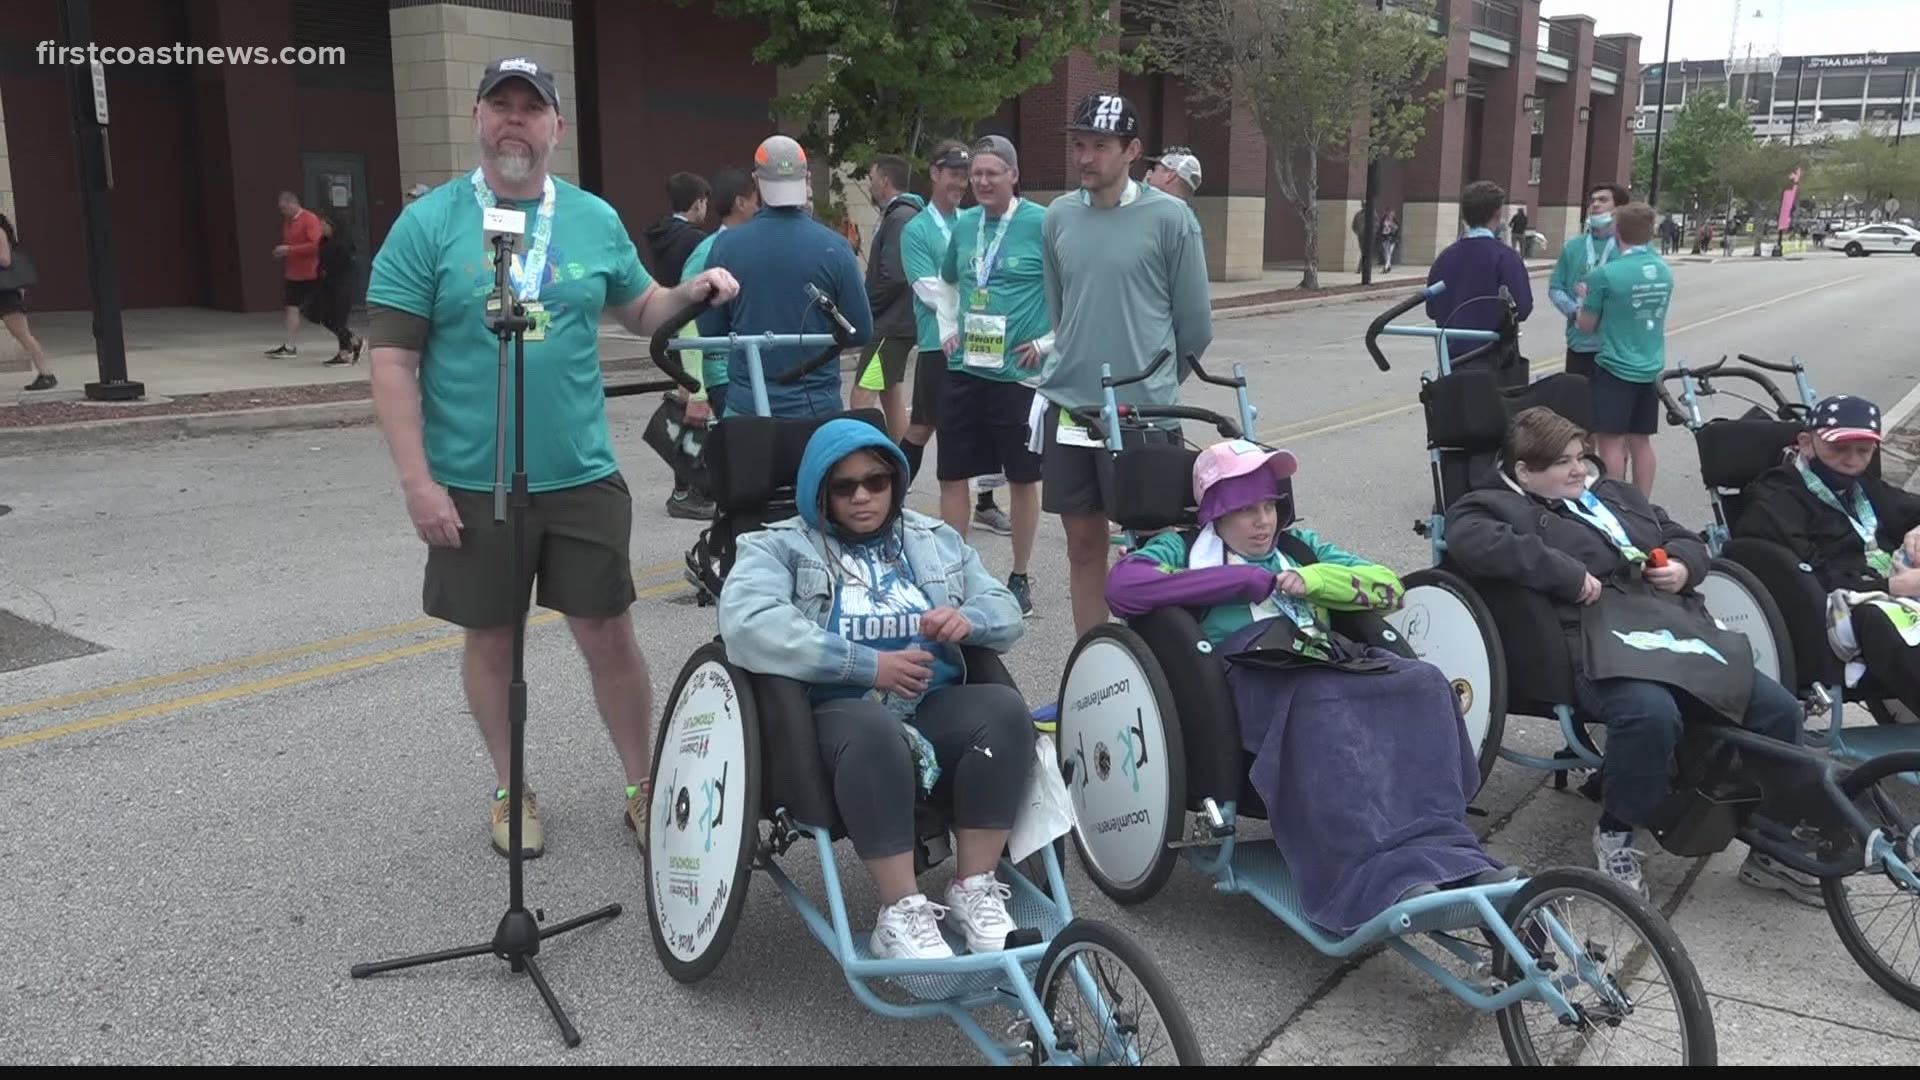 Athletes with and without disabilities team up for Gate River Run 15K